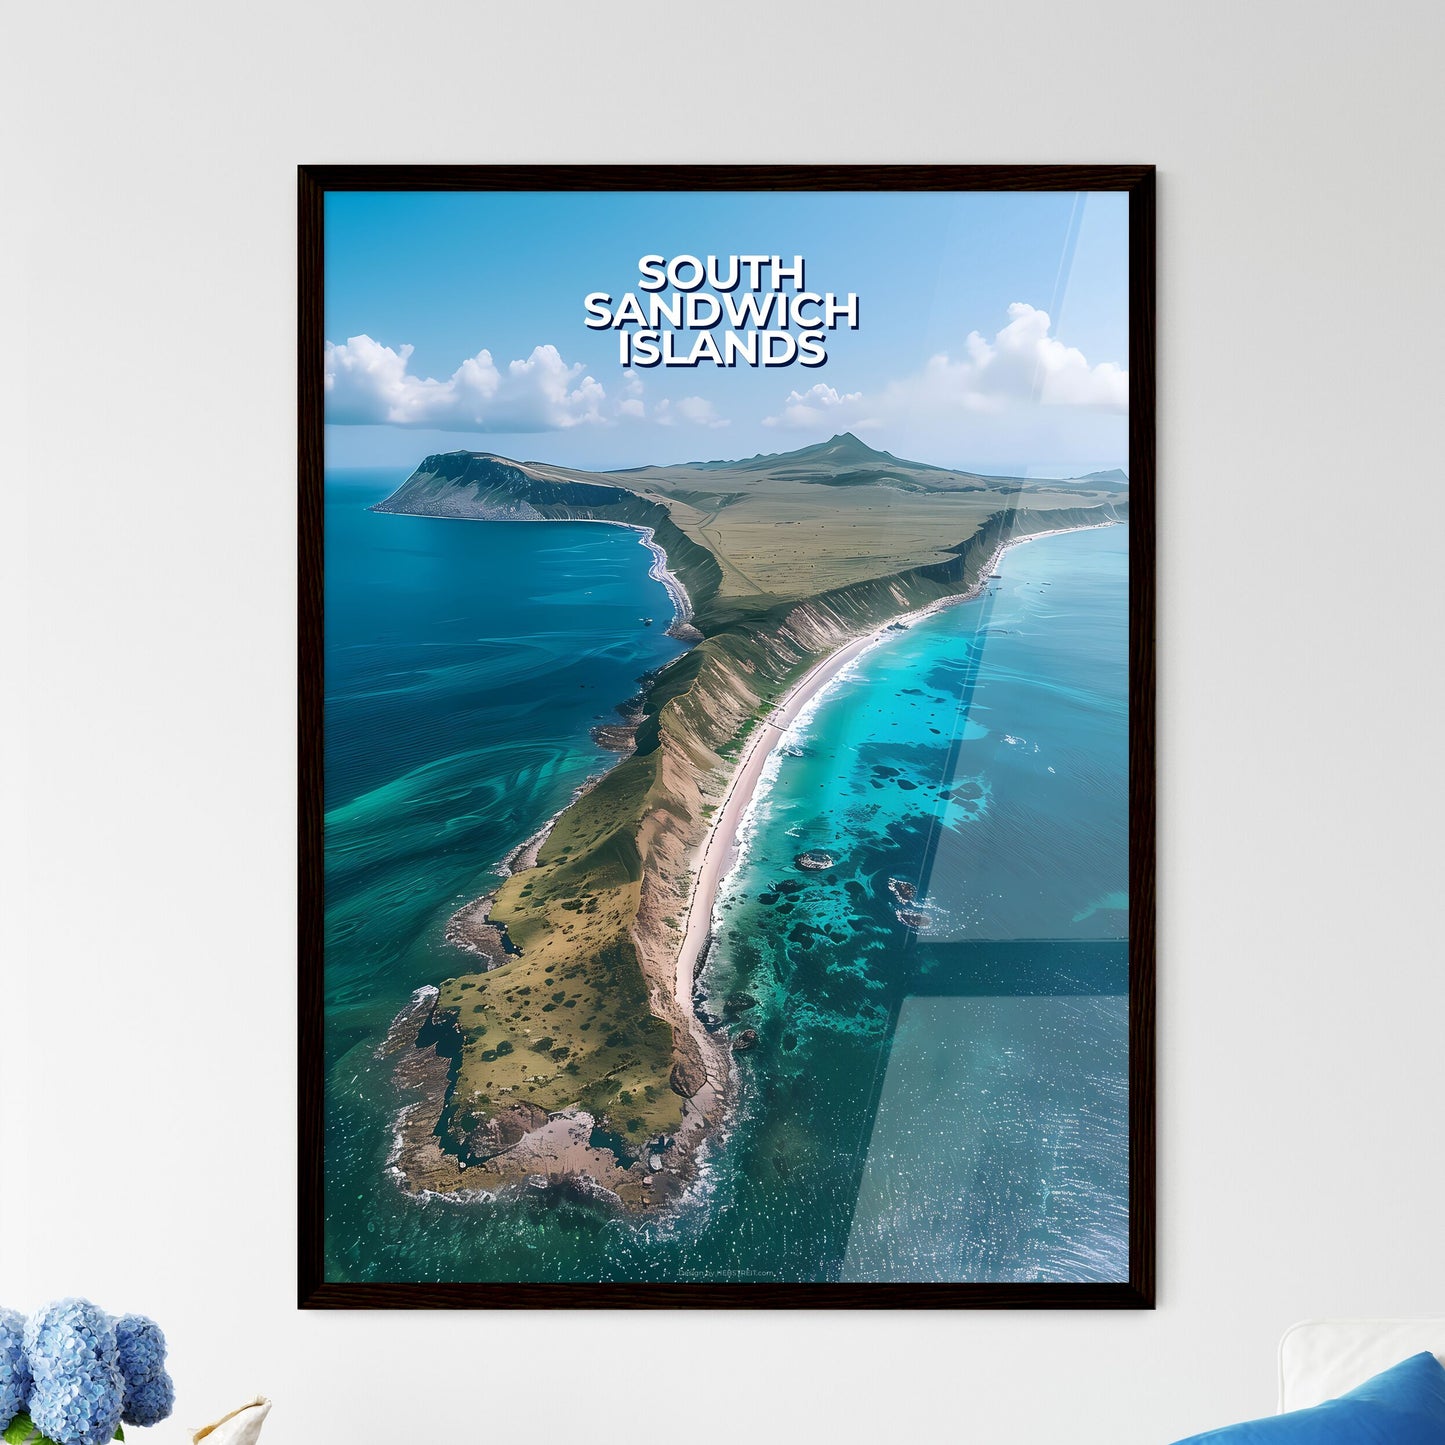 Artistic Interpretation of South Sandwich Islands Landscape: Painted Beach Scene with Turquoise Waters, Vibrant Colors